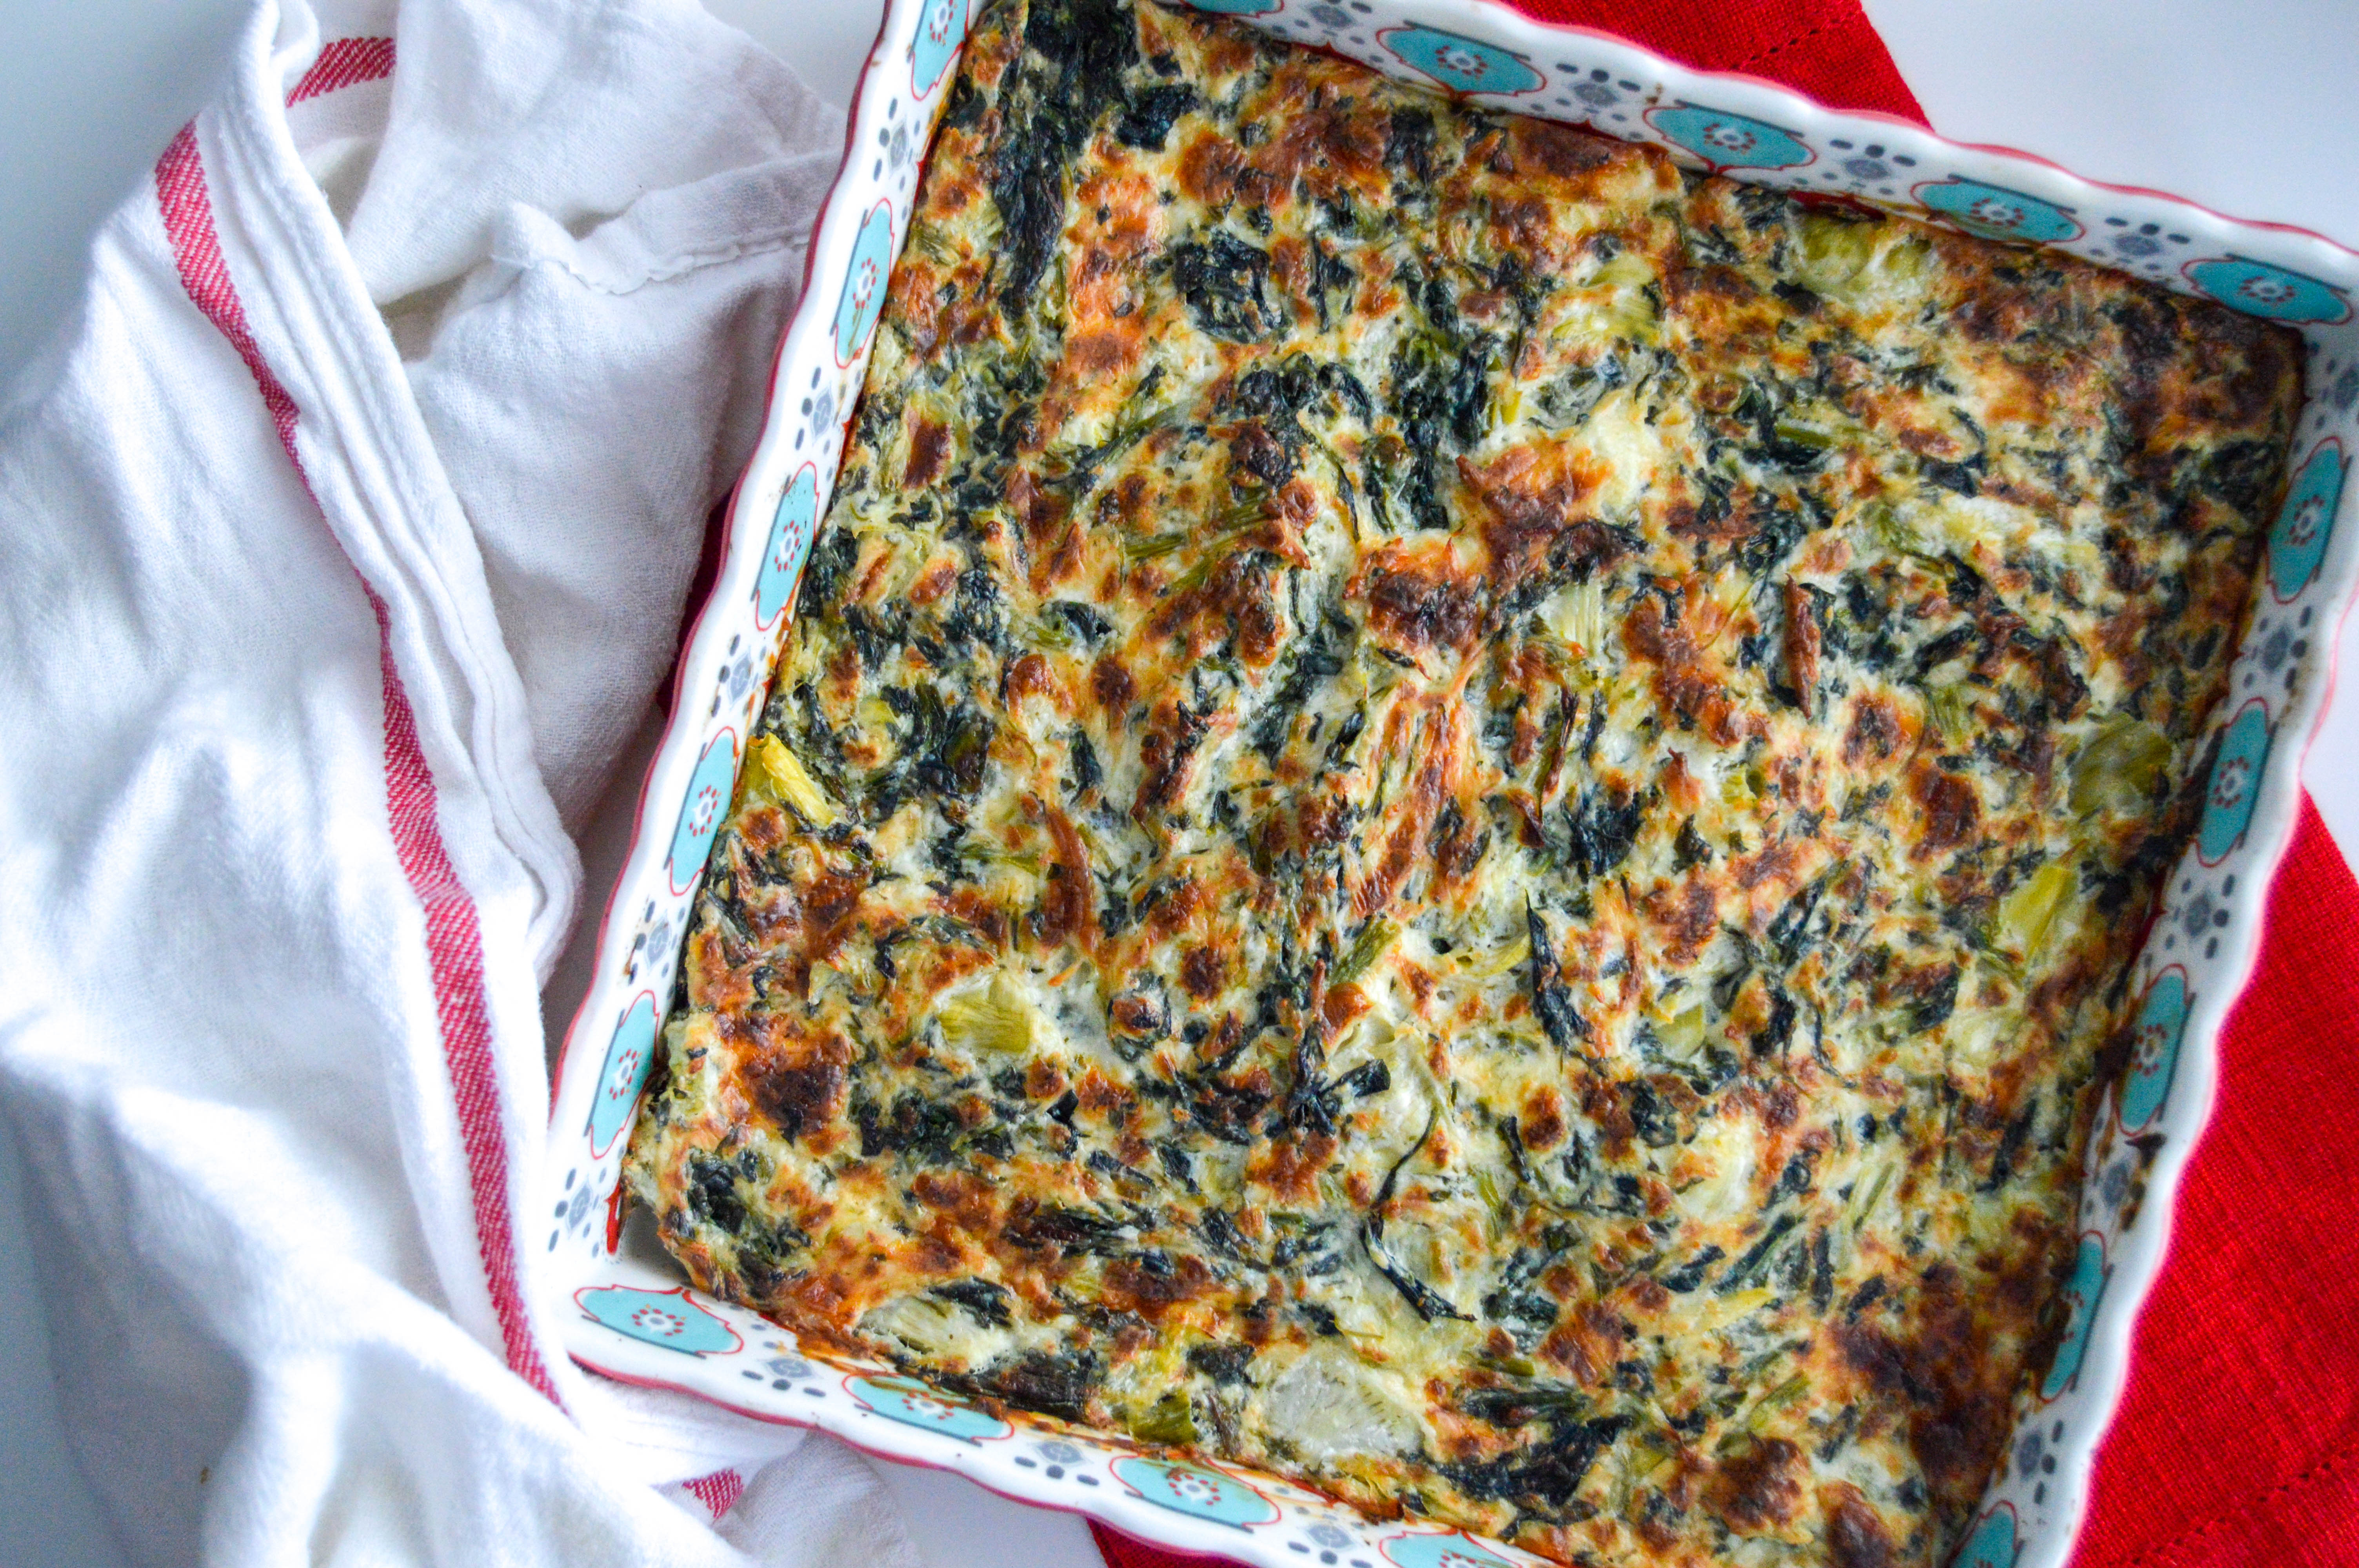 Cheesy spinach artichoke dip recipe that's easy and cheesy. Includes ingredients and directions. Oven baked and served with baguette and Diet Coke. Perfect appetizer for party food or dinner.